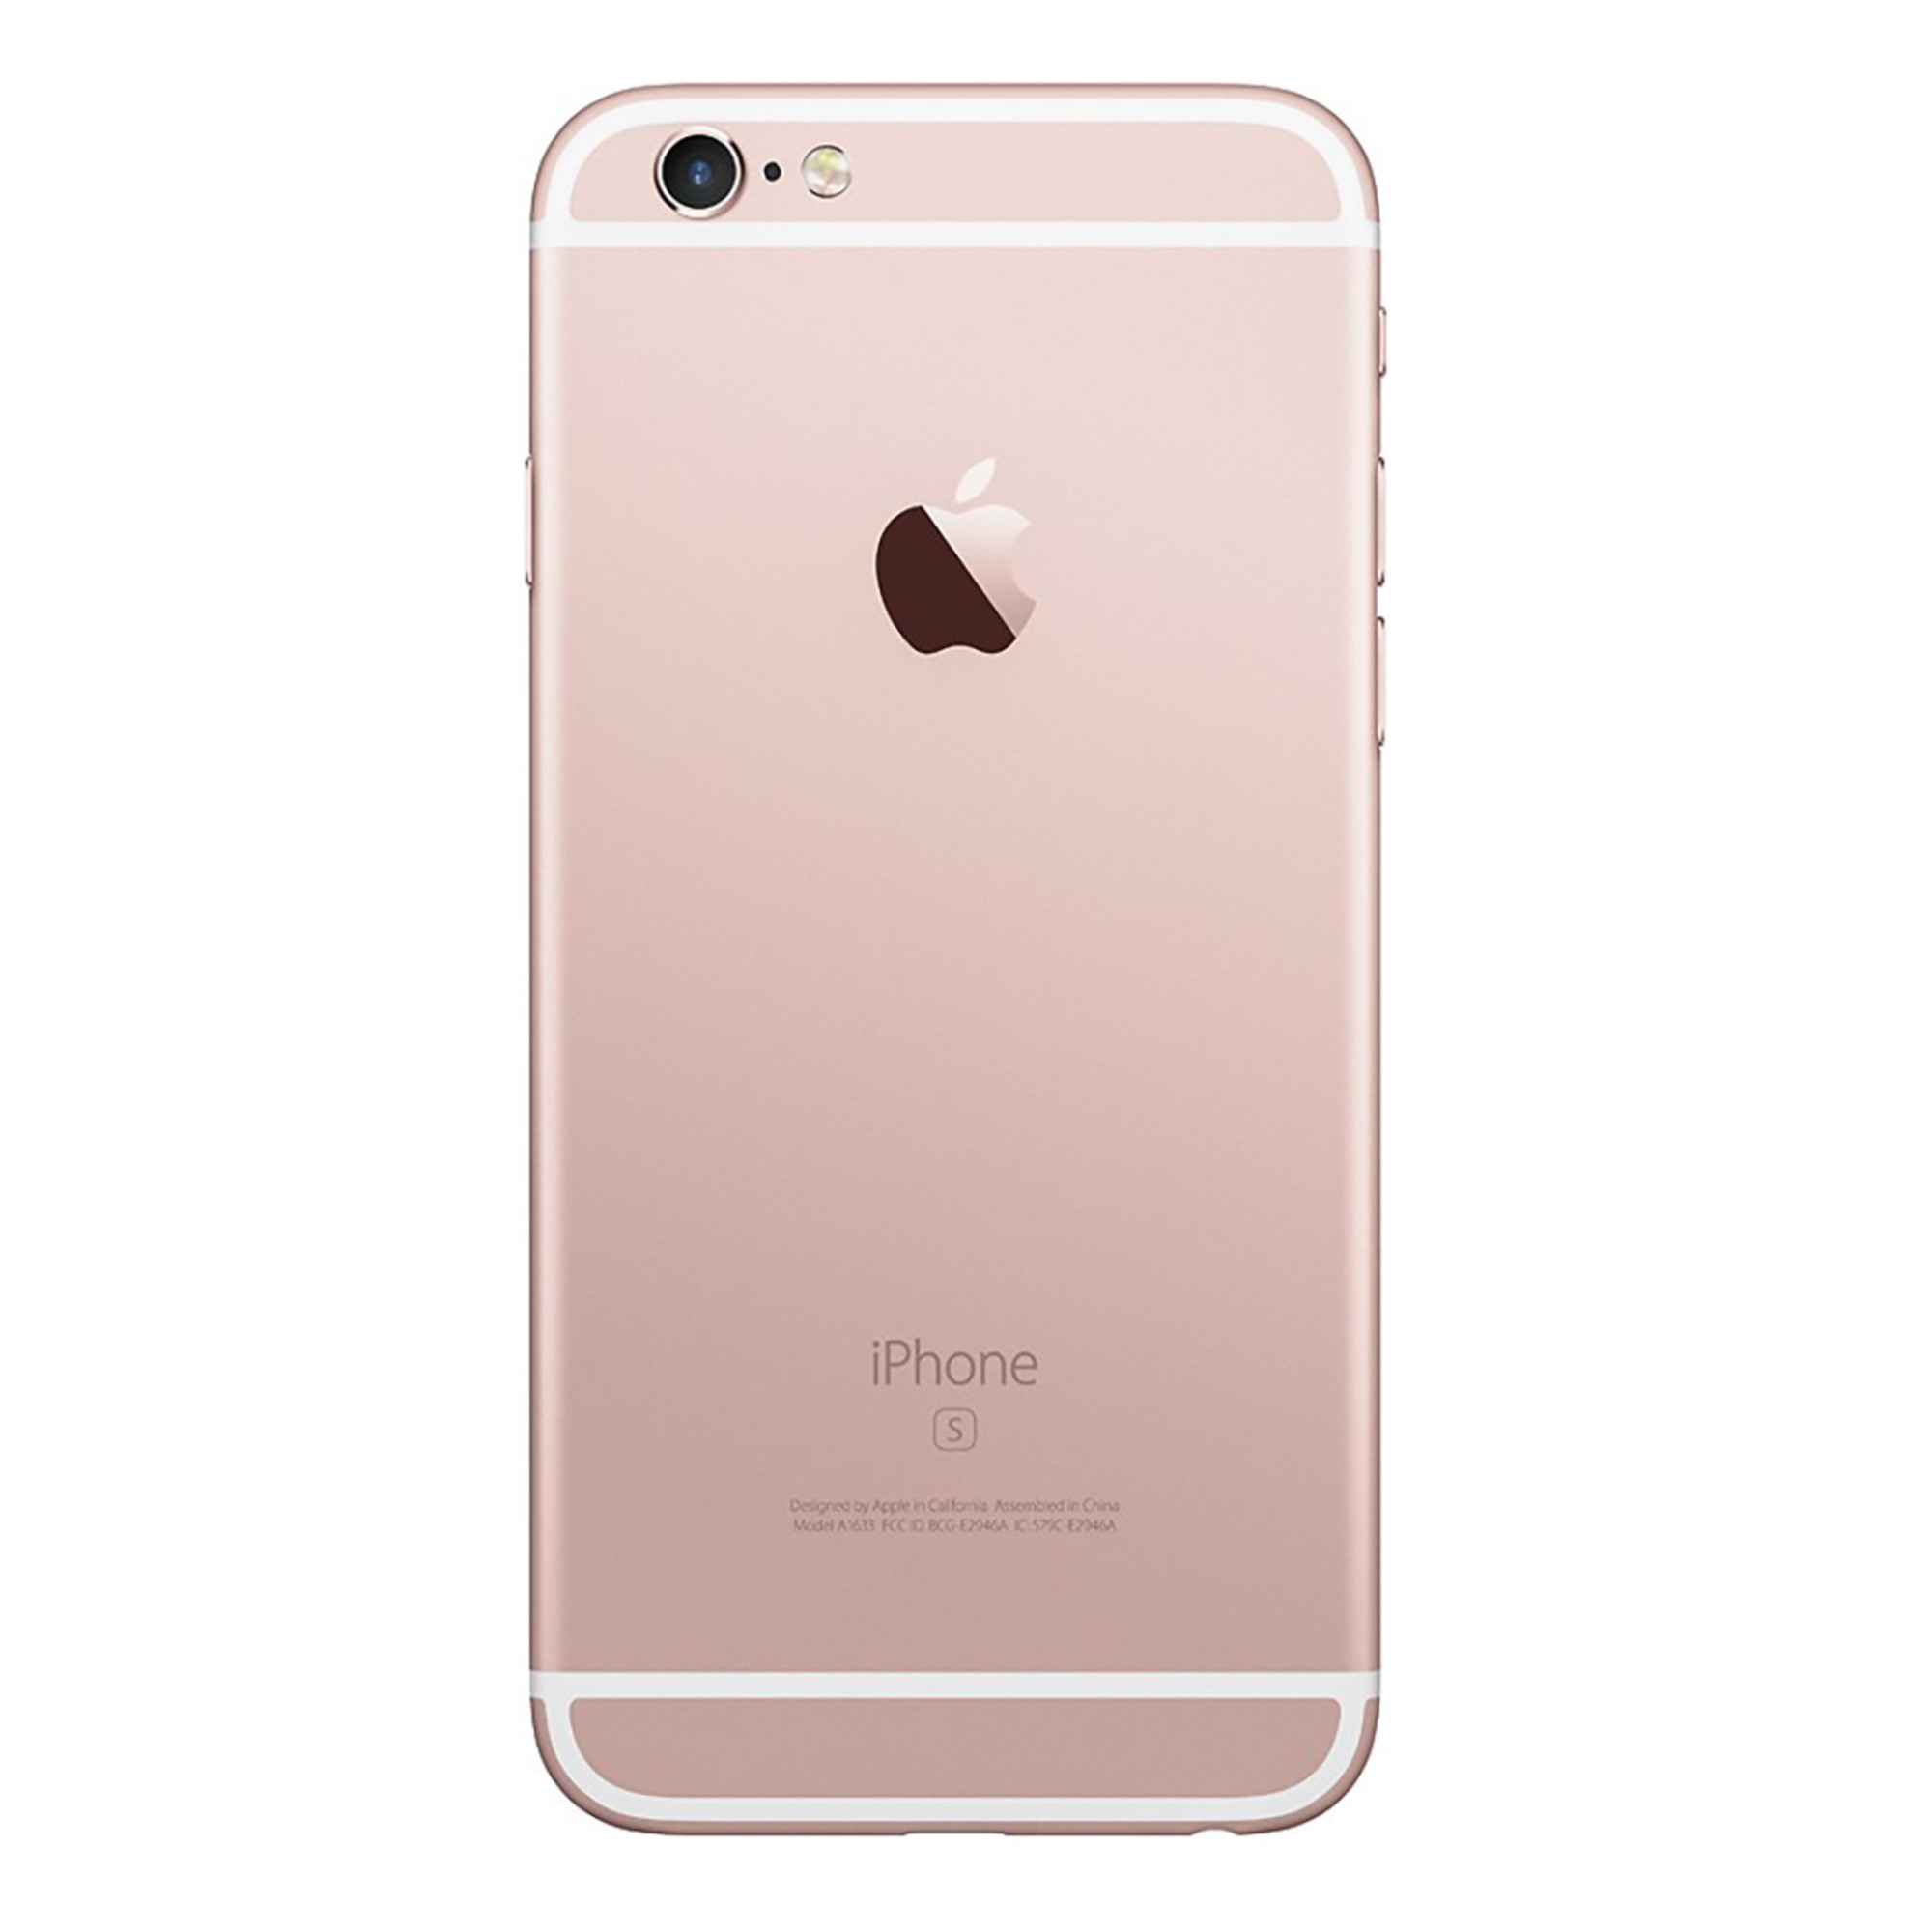 Pre-Owned Apple iPhone 6s 128GB GSM Phone - Rose Gold + WeCare Alcohol Wipes Pack (50 Wipes) (Refurbished: Good) - image 2 of 6